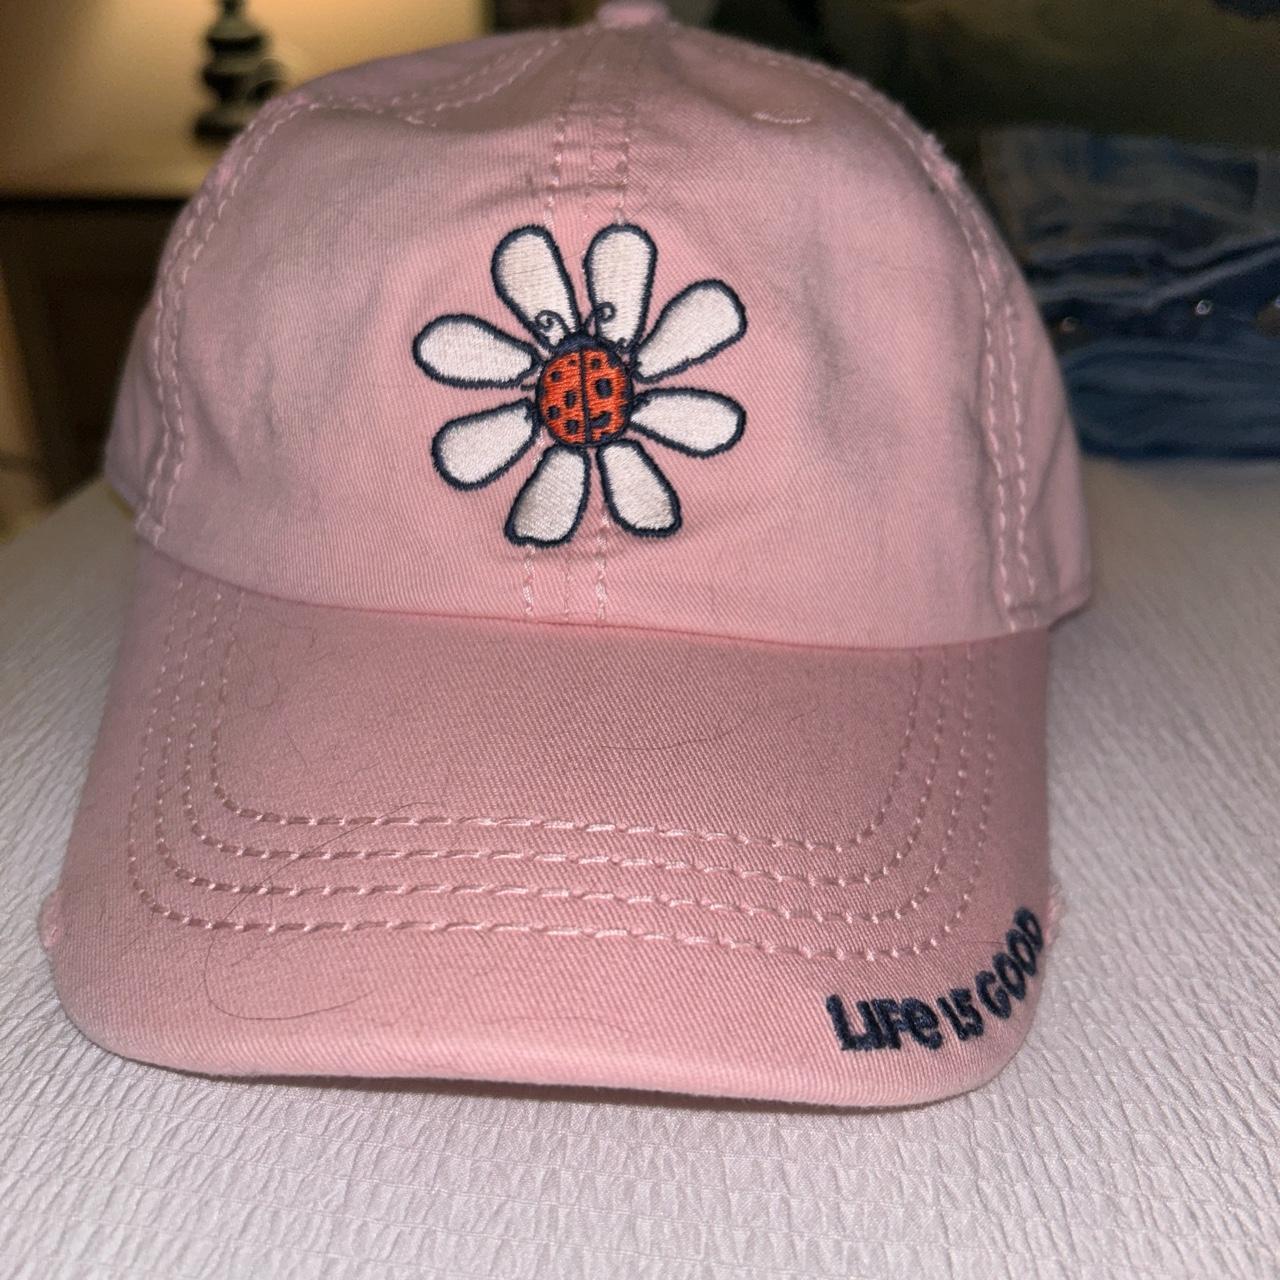 Life is good baby pink baseball hat with embroidered - Depop